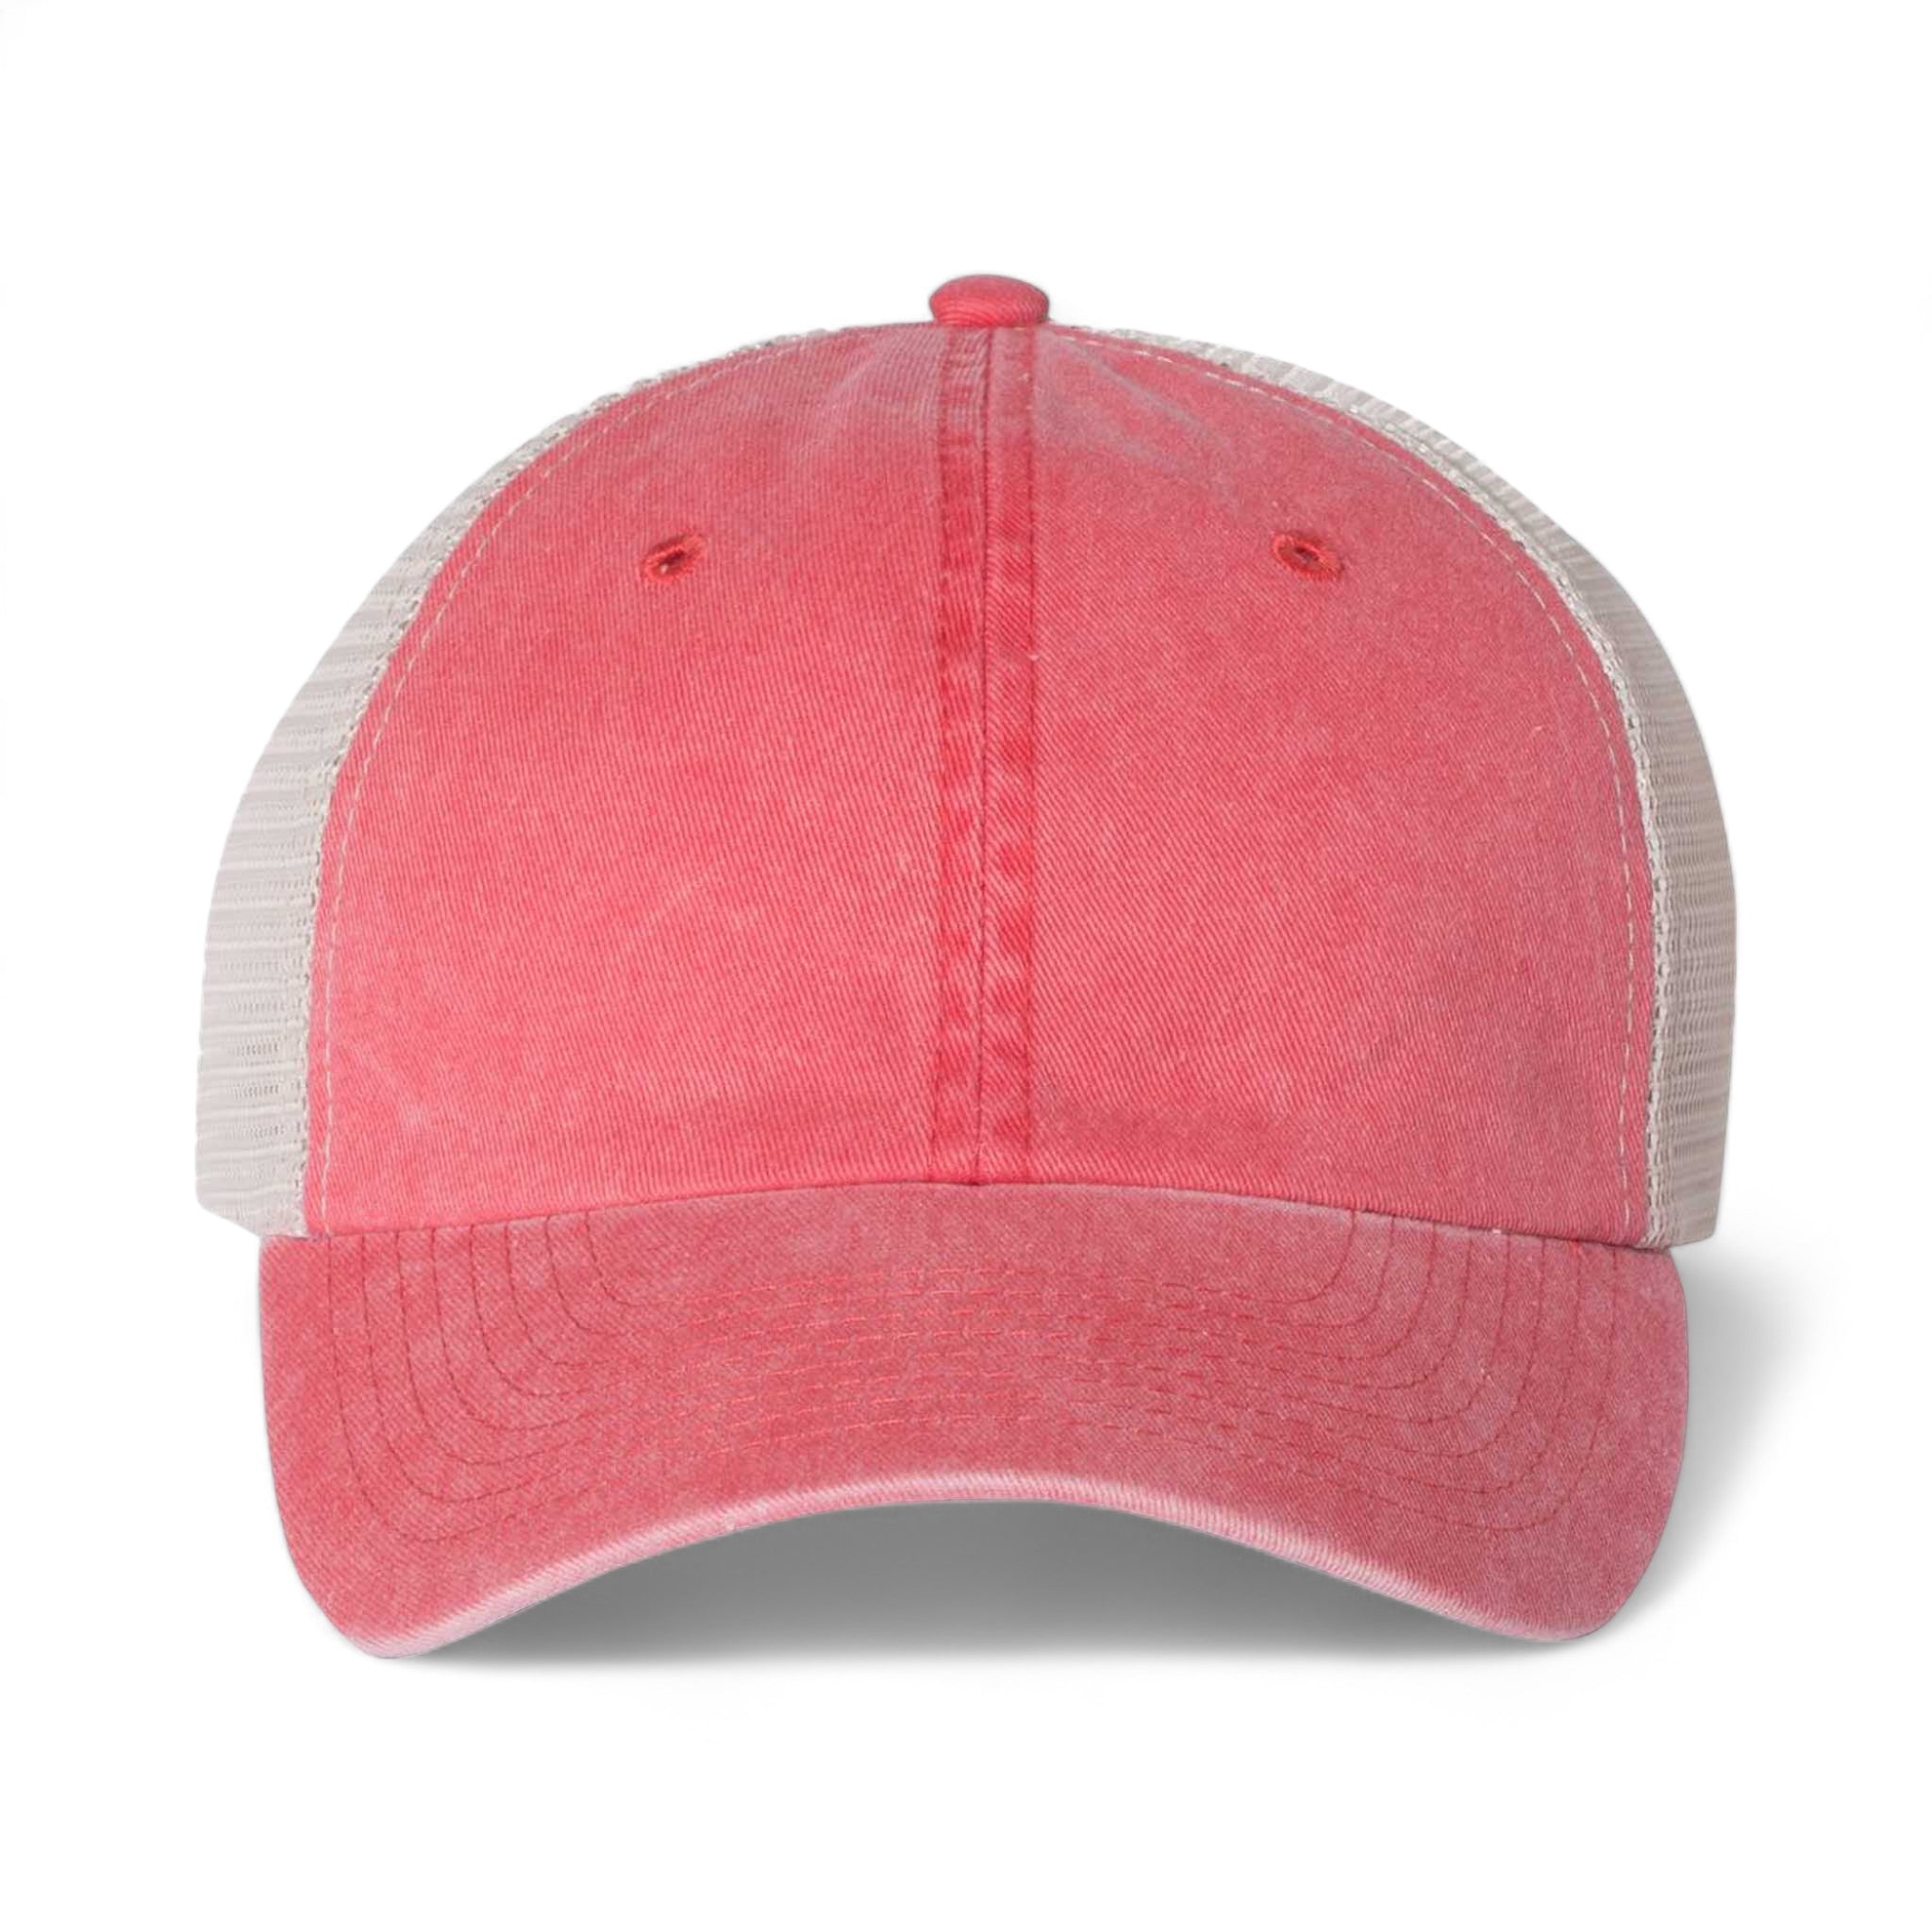 Front view of Sportsman SP510 custom hat in red and stone